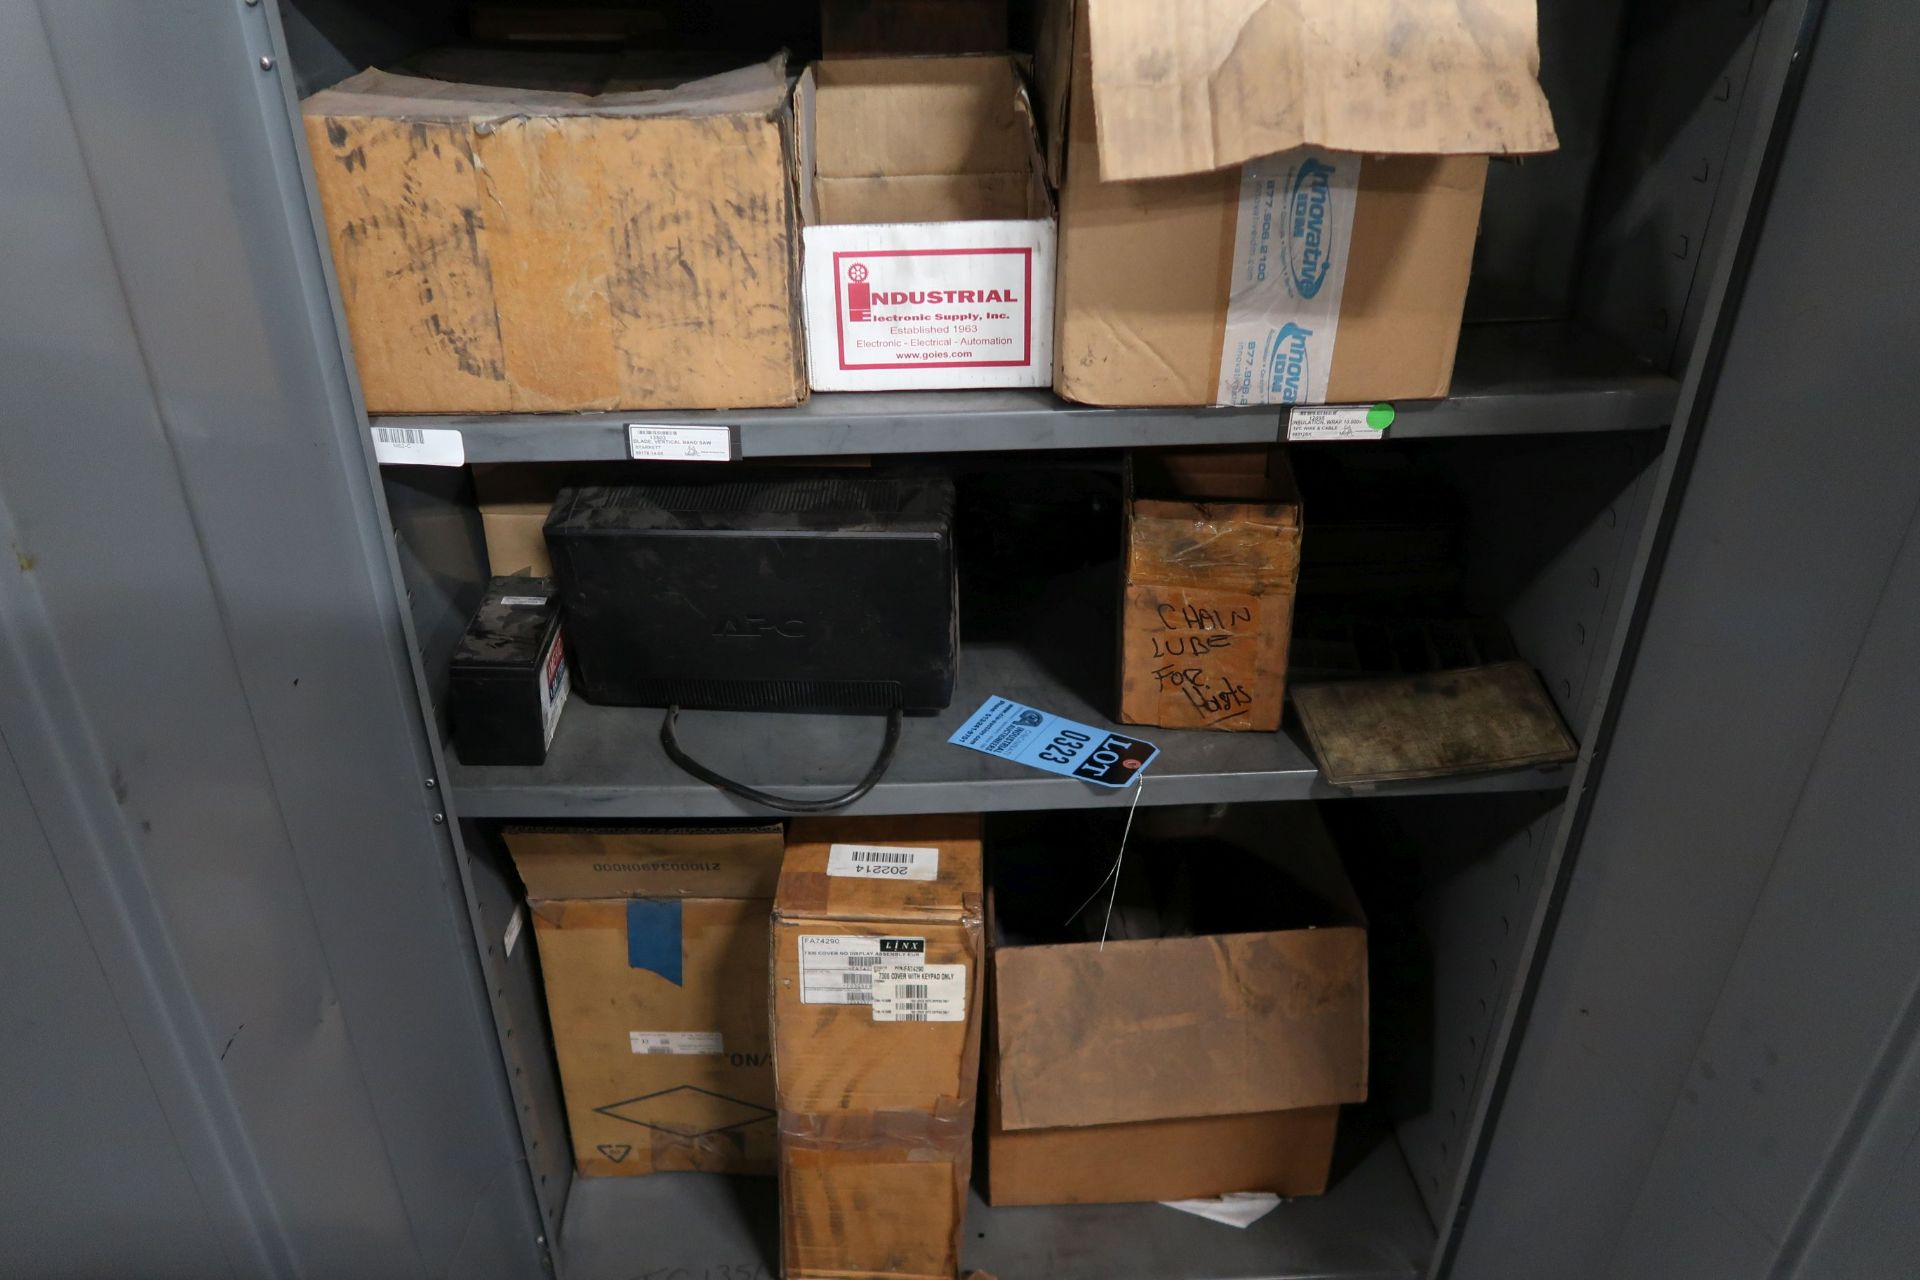 (LOT) STORAGE CABINET WITH MACHINE PARTS **LOADING PRICE DUE TO ERRA - $50.00** - Image 3 of 3